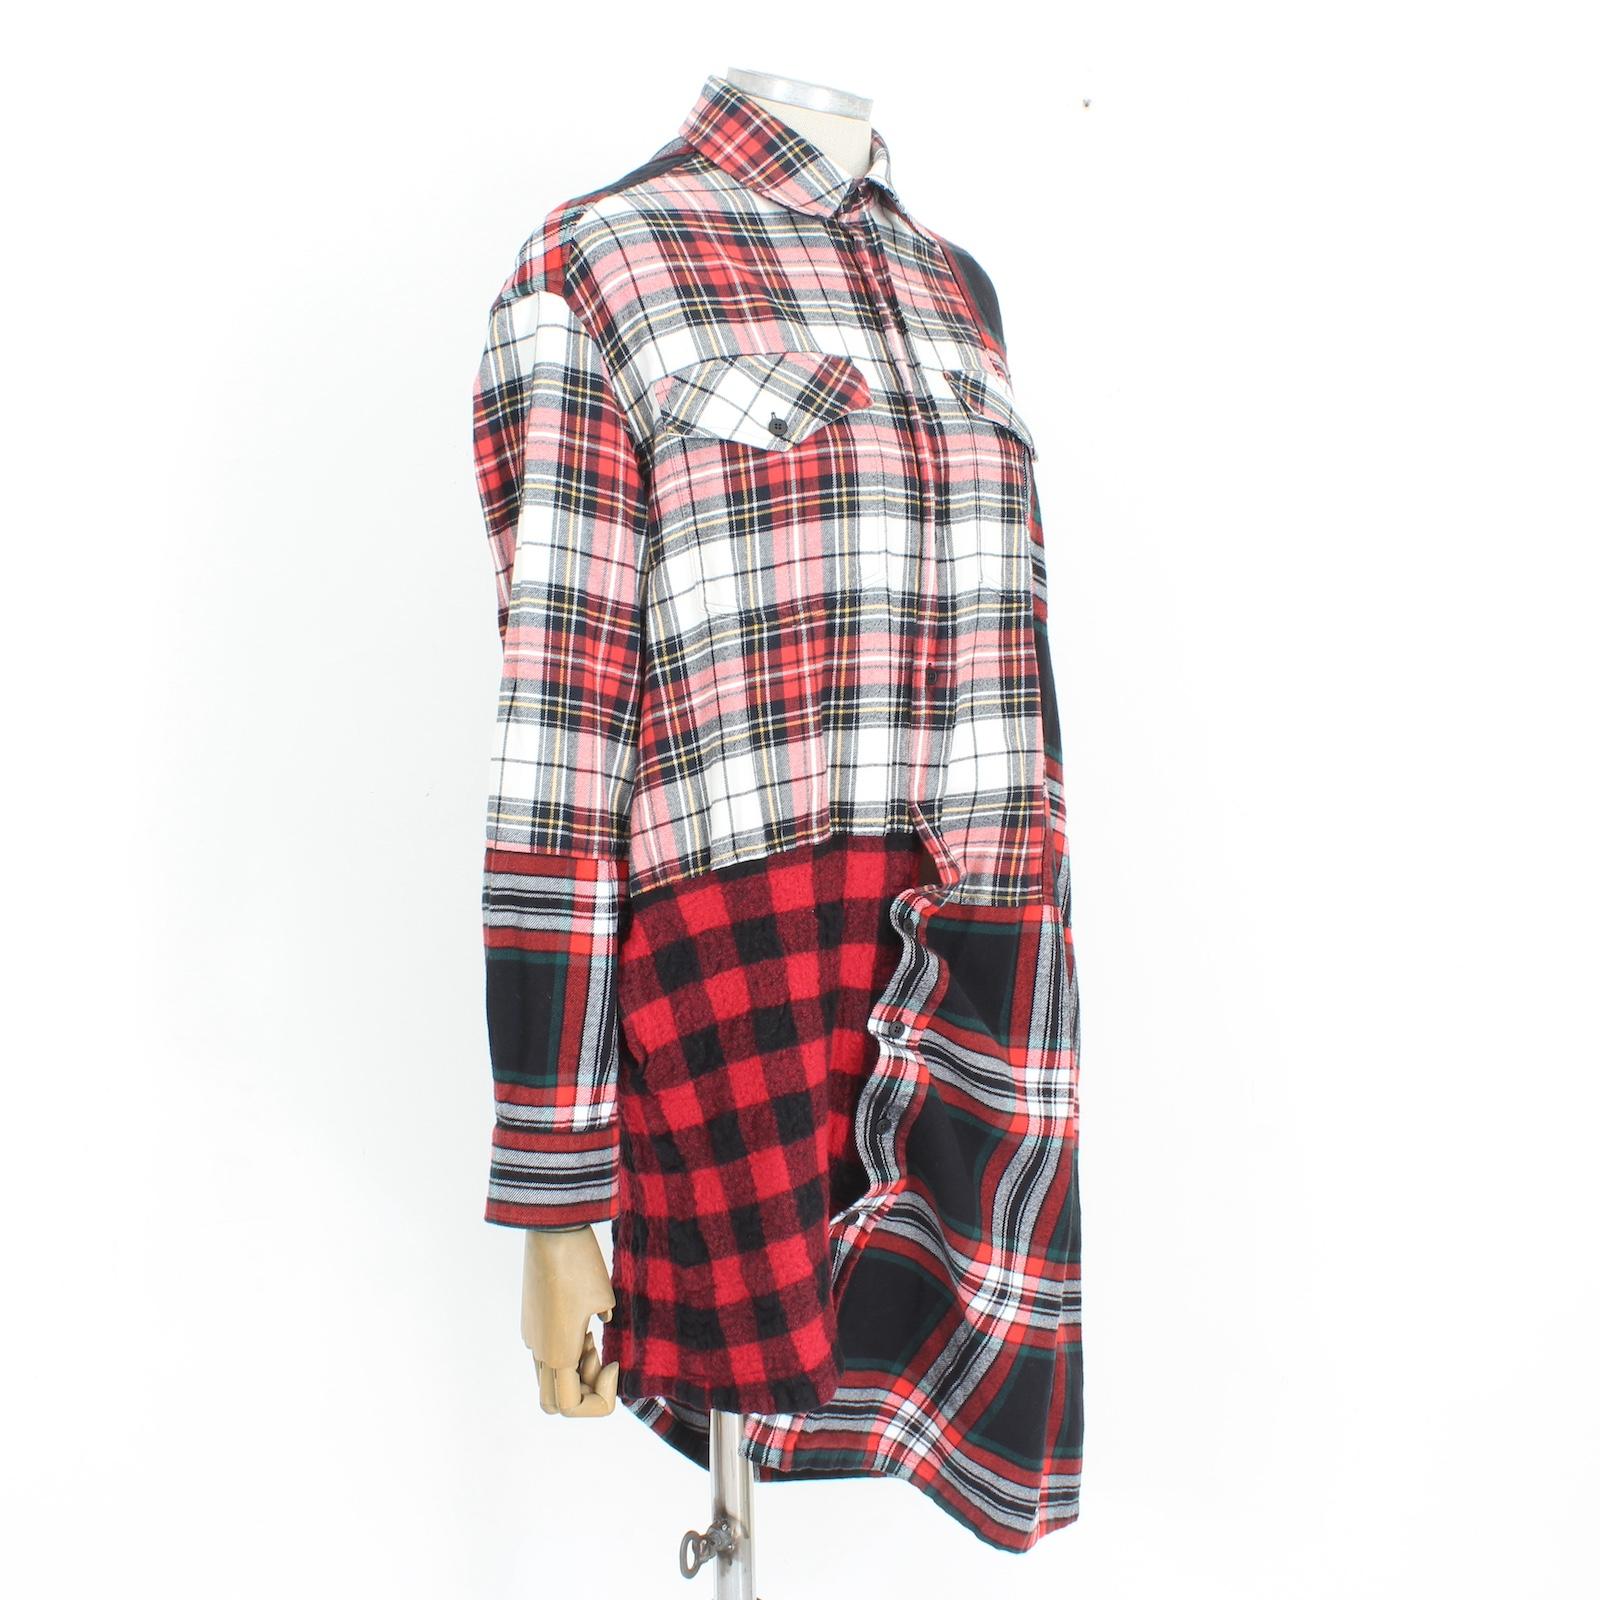 Alexander McQueen Red White Check Asymmetric Dress 2000s In Excellent Condition For Sale In Brindisi, Bt